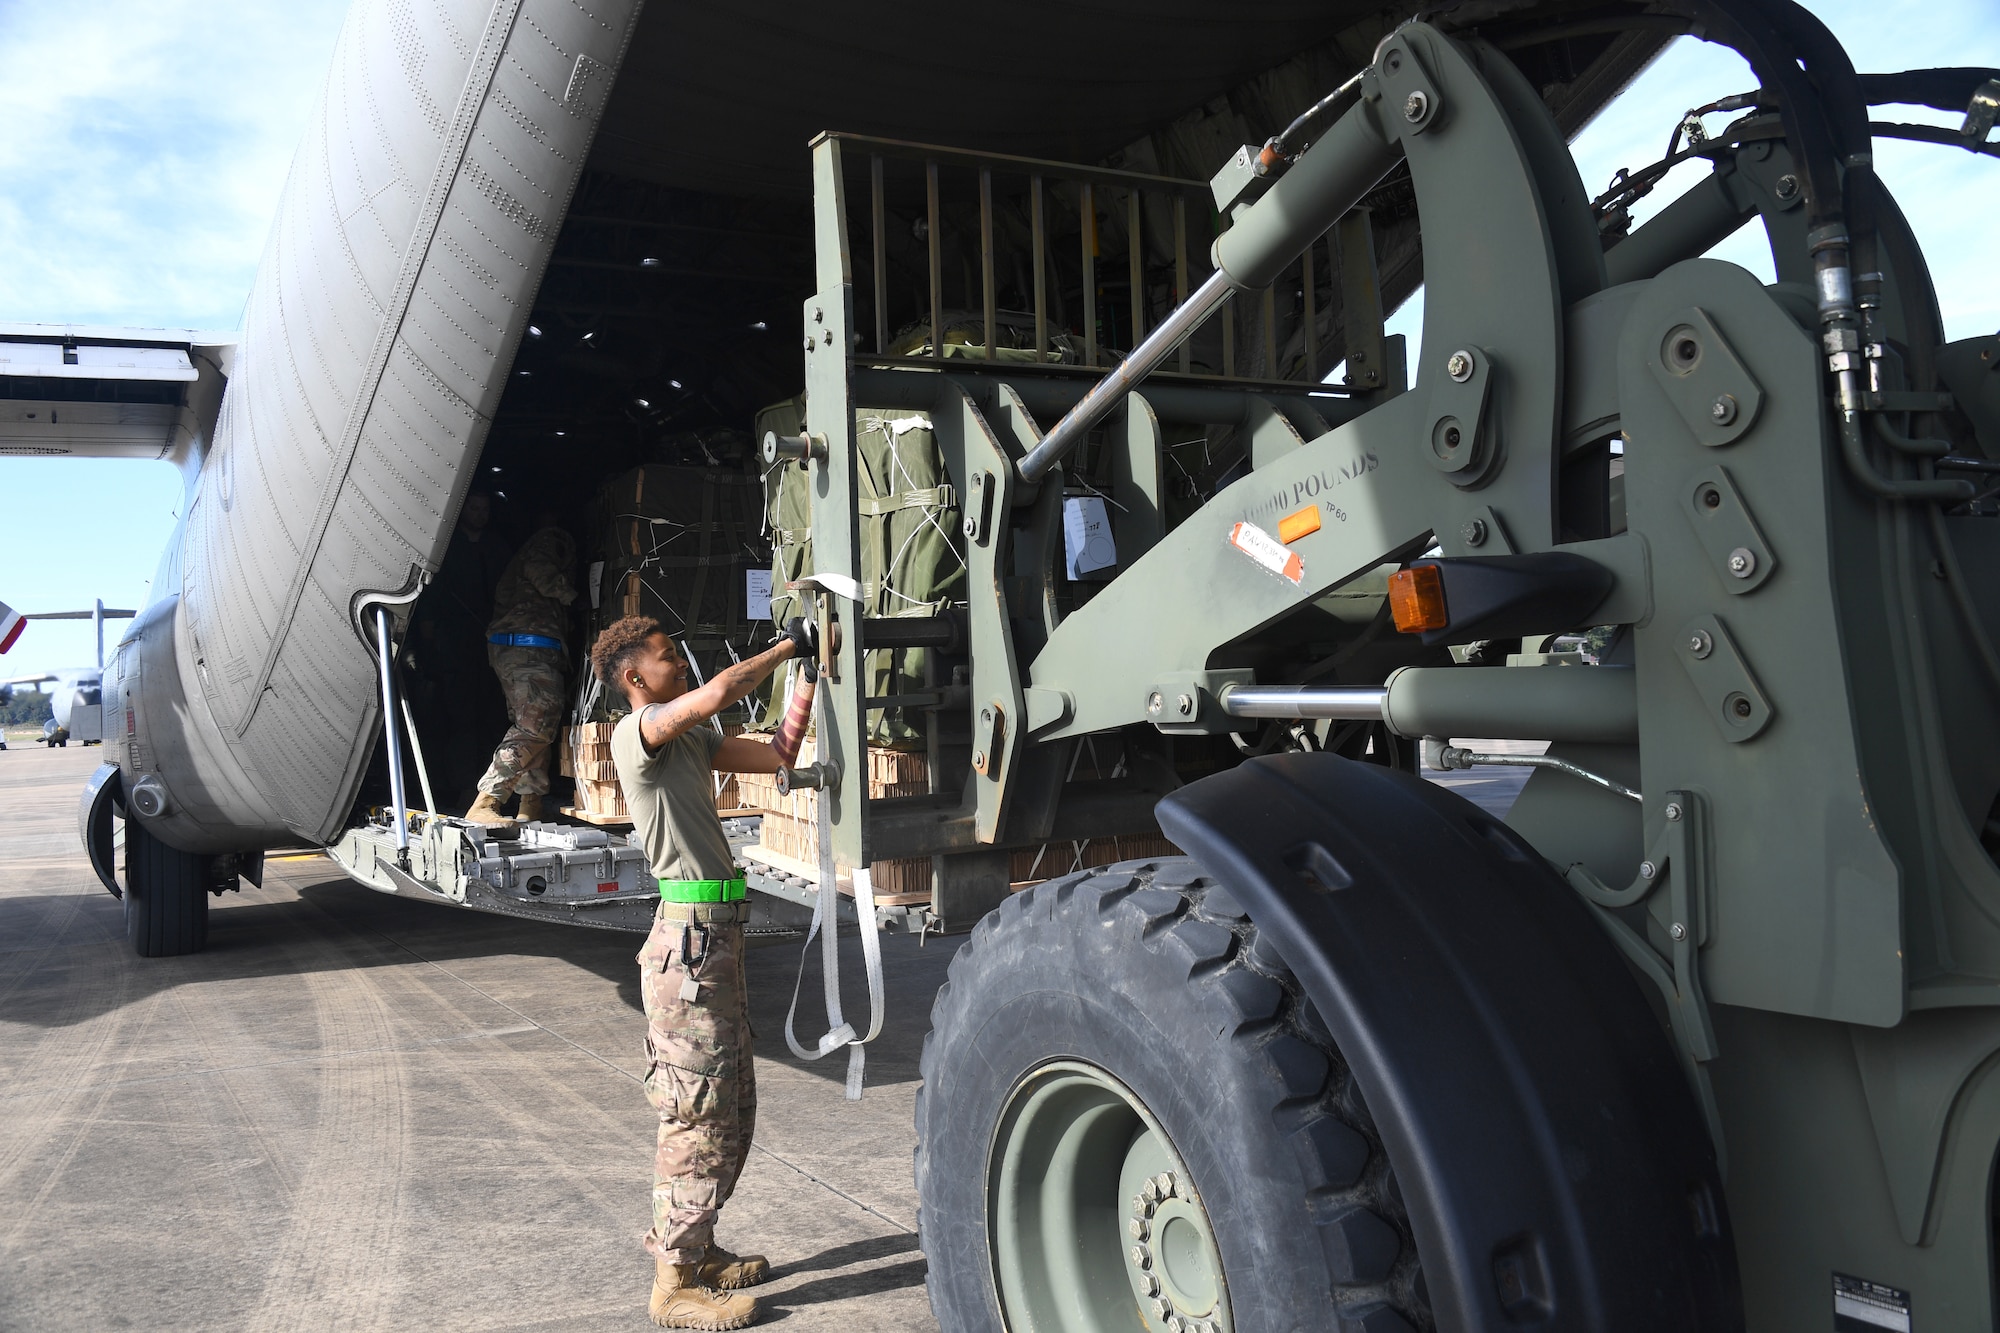 U.S. Air Force Airman 1st Class Dominitrius Stribling, 321st Contingency Response Squadron aerial porter, secures cargo being loaded onto a Swedish Air Force C-130 aircraft during exercise Green Flag Little Rock, Oct. 24, 2019, Alexandria International Airport, Louisiana. During the exercise the team loaded and downloaded tactical vehicles, airdrop bundles, along with a variety of other pallets to support the Army. (U.S. Air Force photo by Tech. Sgt. Liliana Moreno)